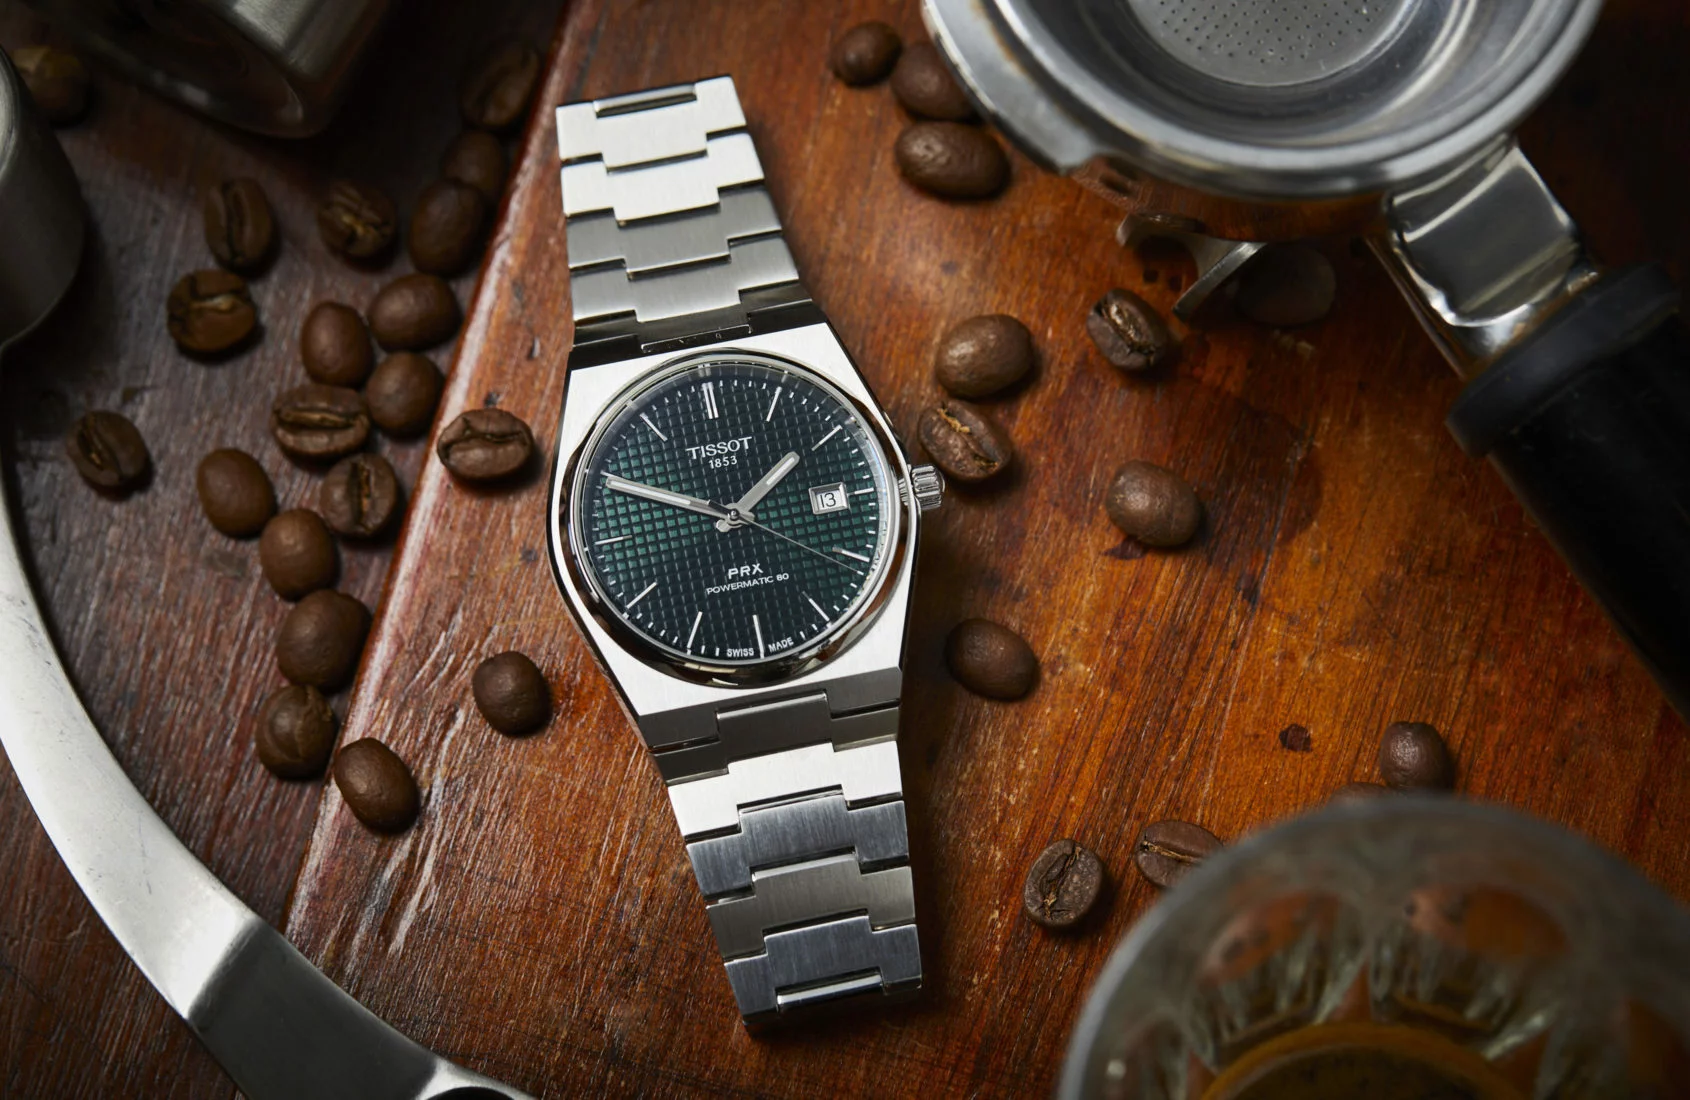 Six of the best watches for a slender wrist